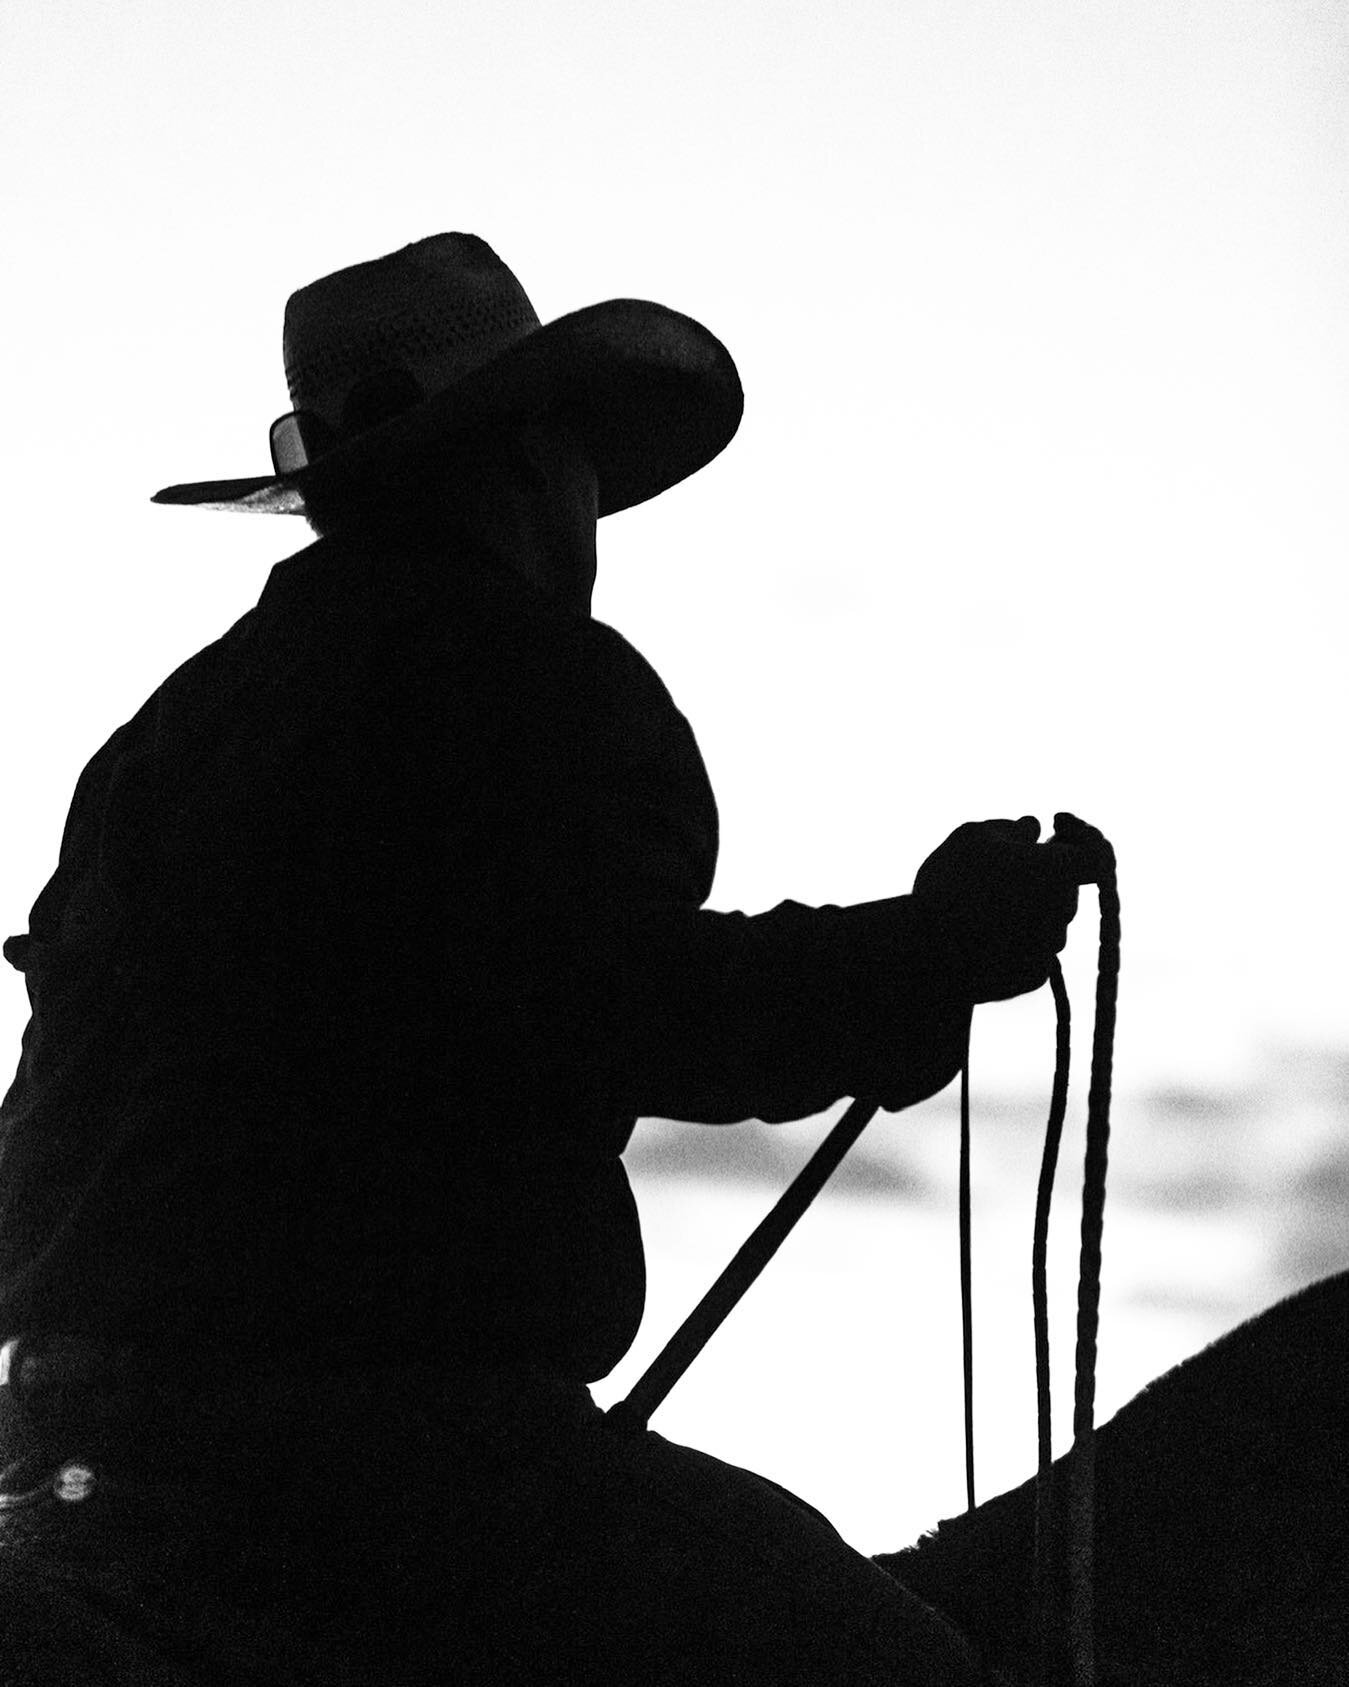 Early morning cowboy silhouettes for @stockyardbeef 🤠 #TheJtaime